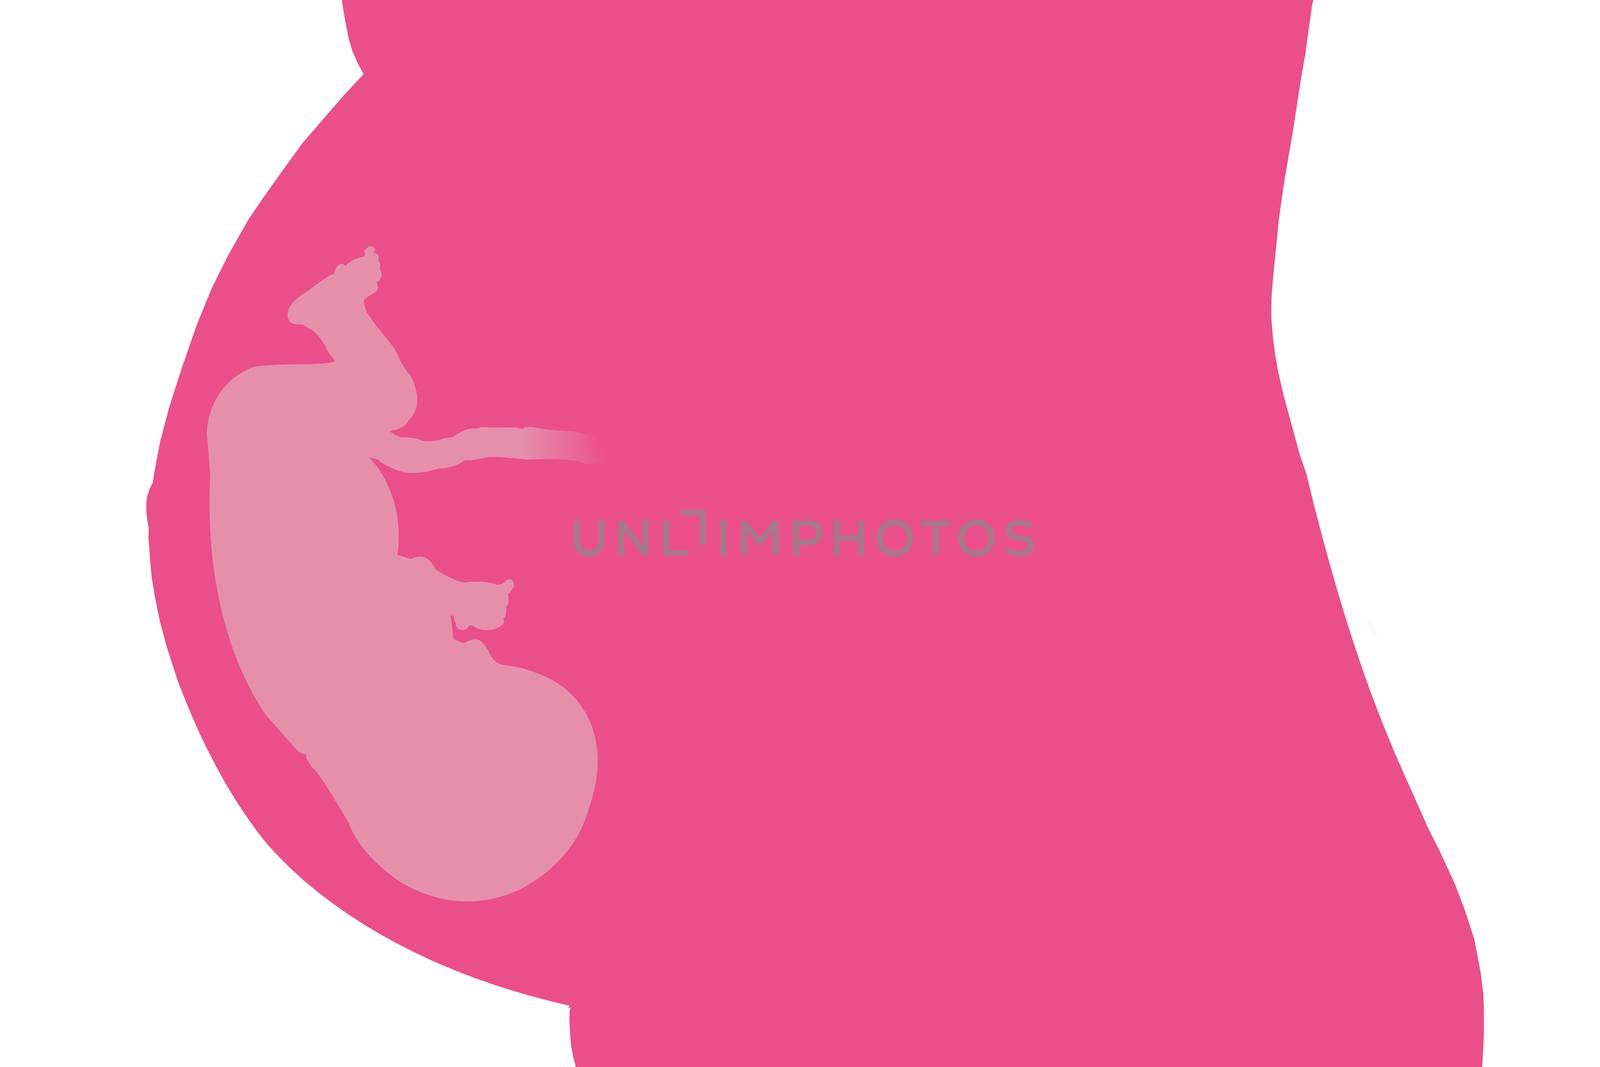 Pregnancy. Pregnant belly with baby illustration. by eskymaks